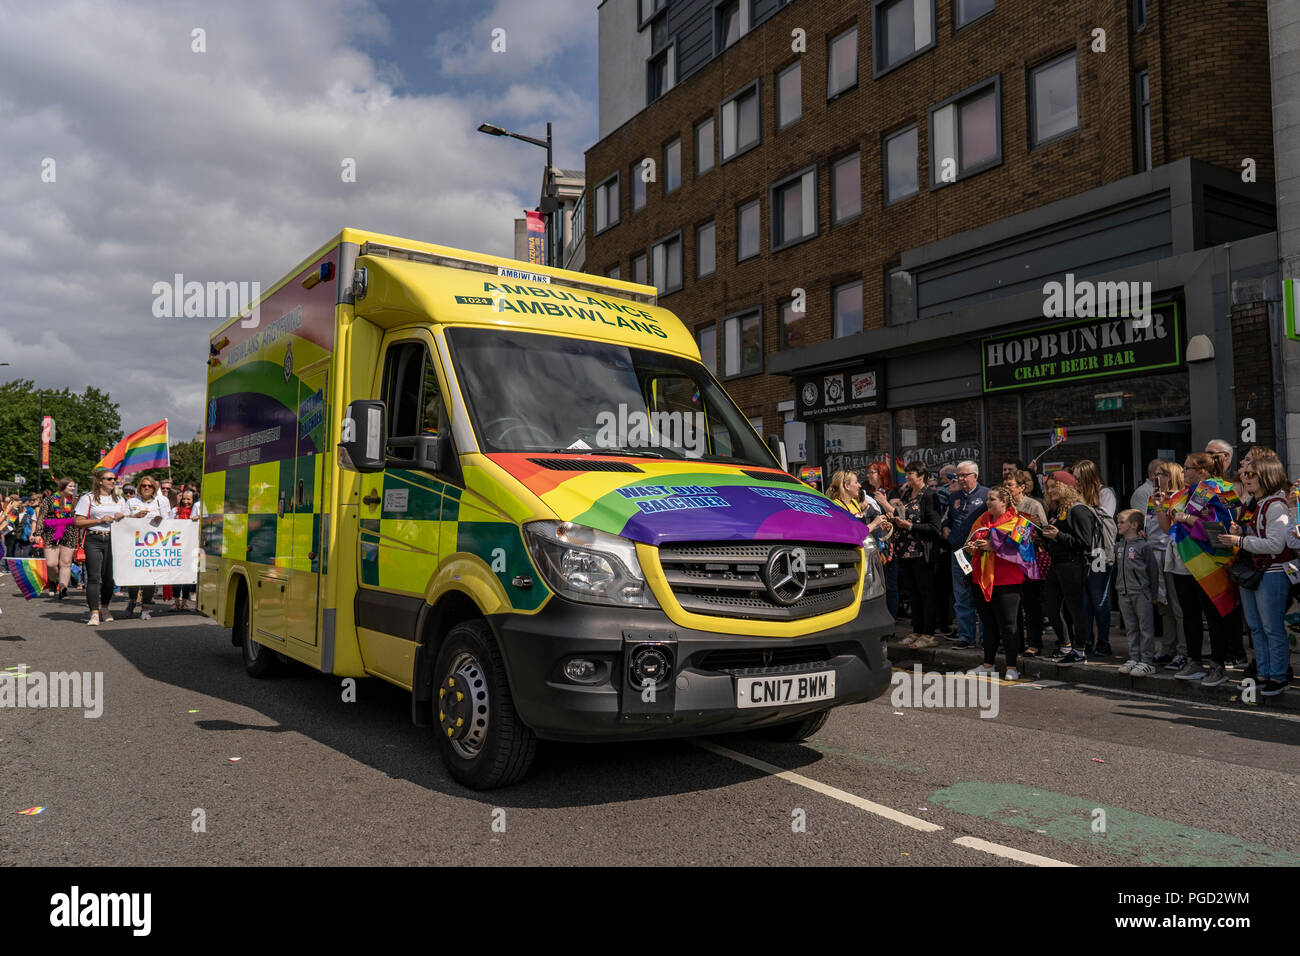 Cardiff, Wales, August 25, 2018: Ambulance car participates at the  Annual Pride Cymru Parade  in Cardiff, Wales on August 25, 2018 ©Daniel Damaschin Credit: Daniel Damaschin/Alamy Live News Stock Photo